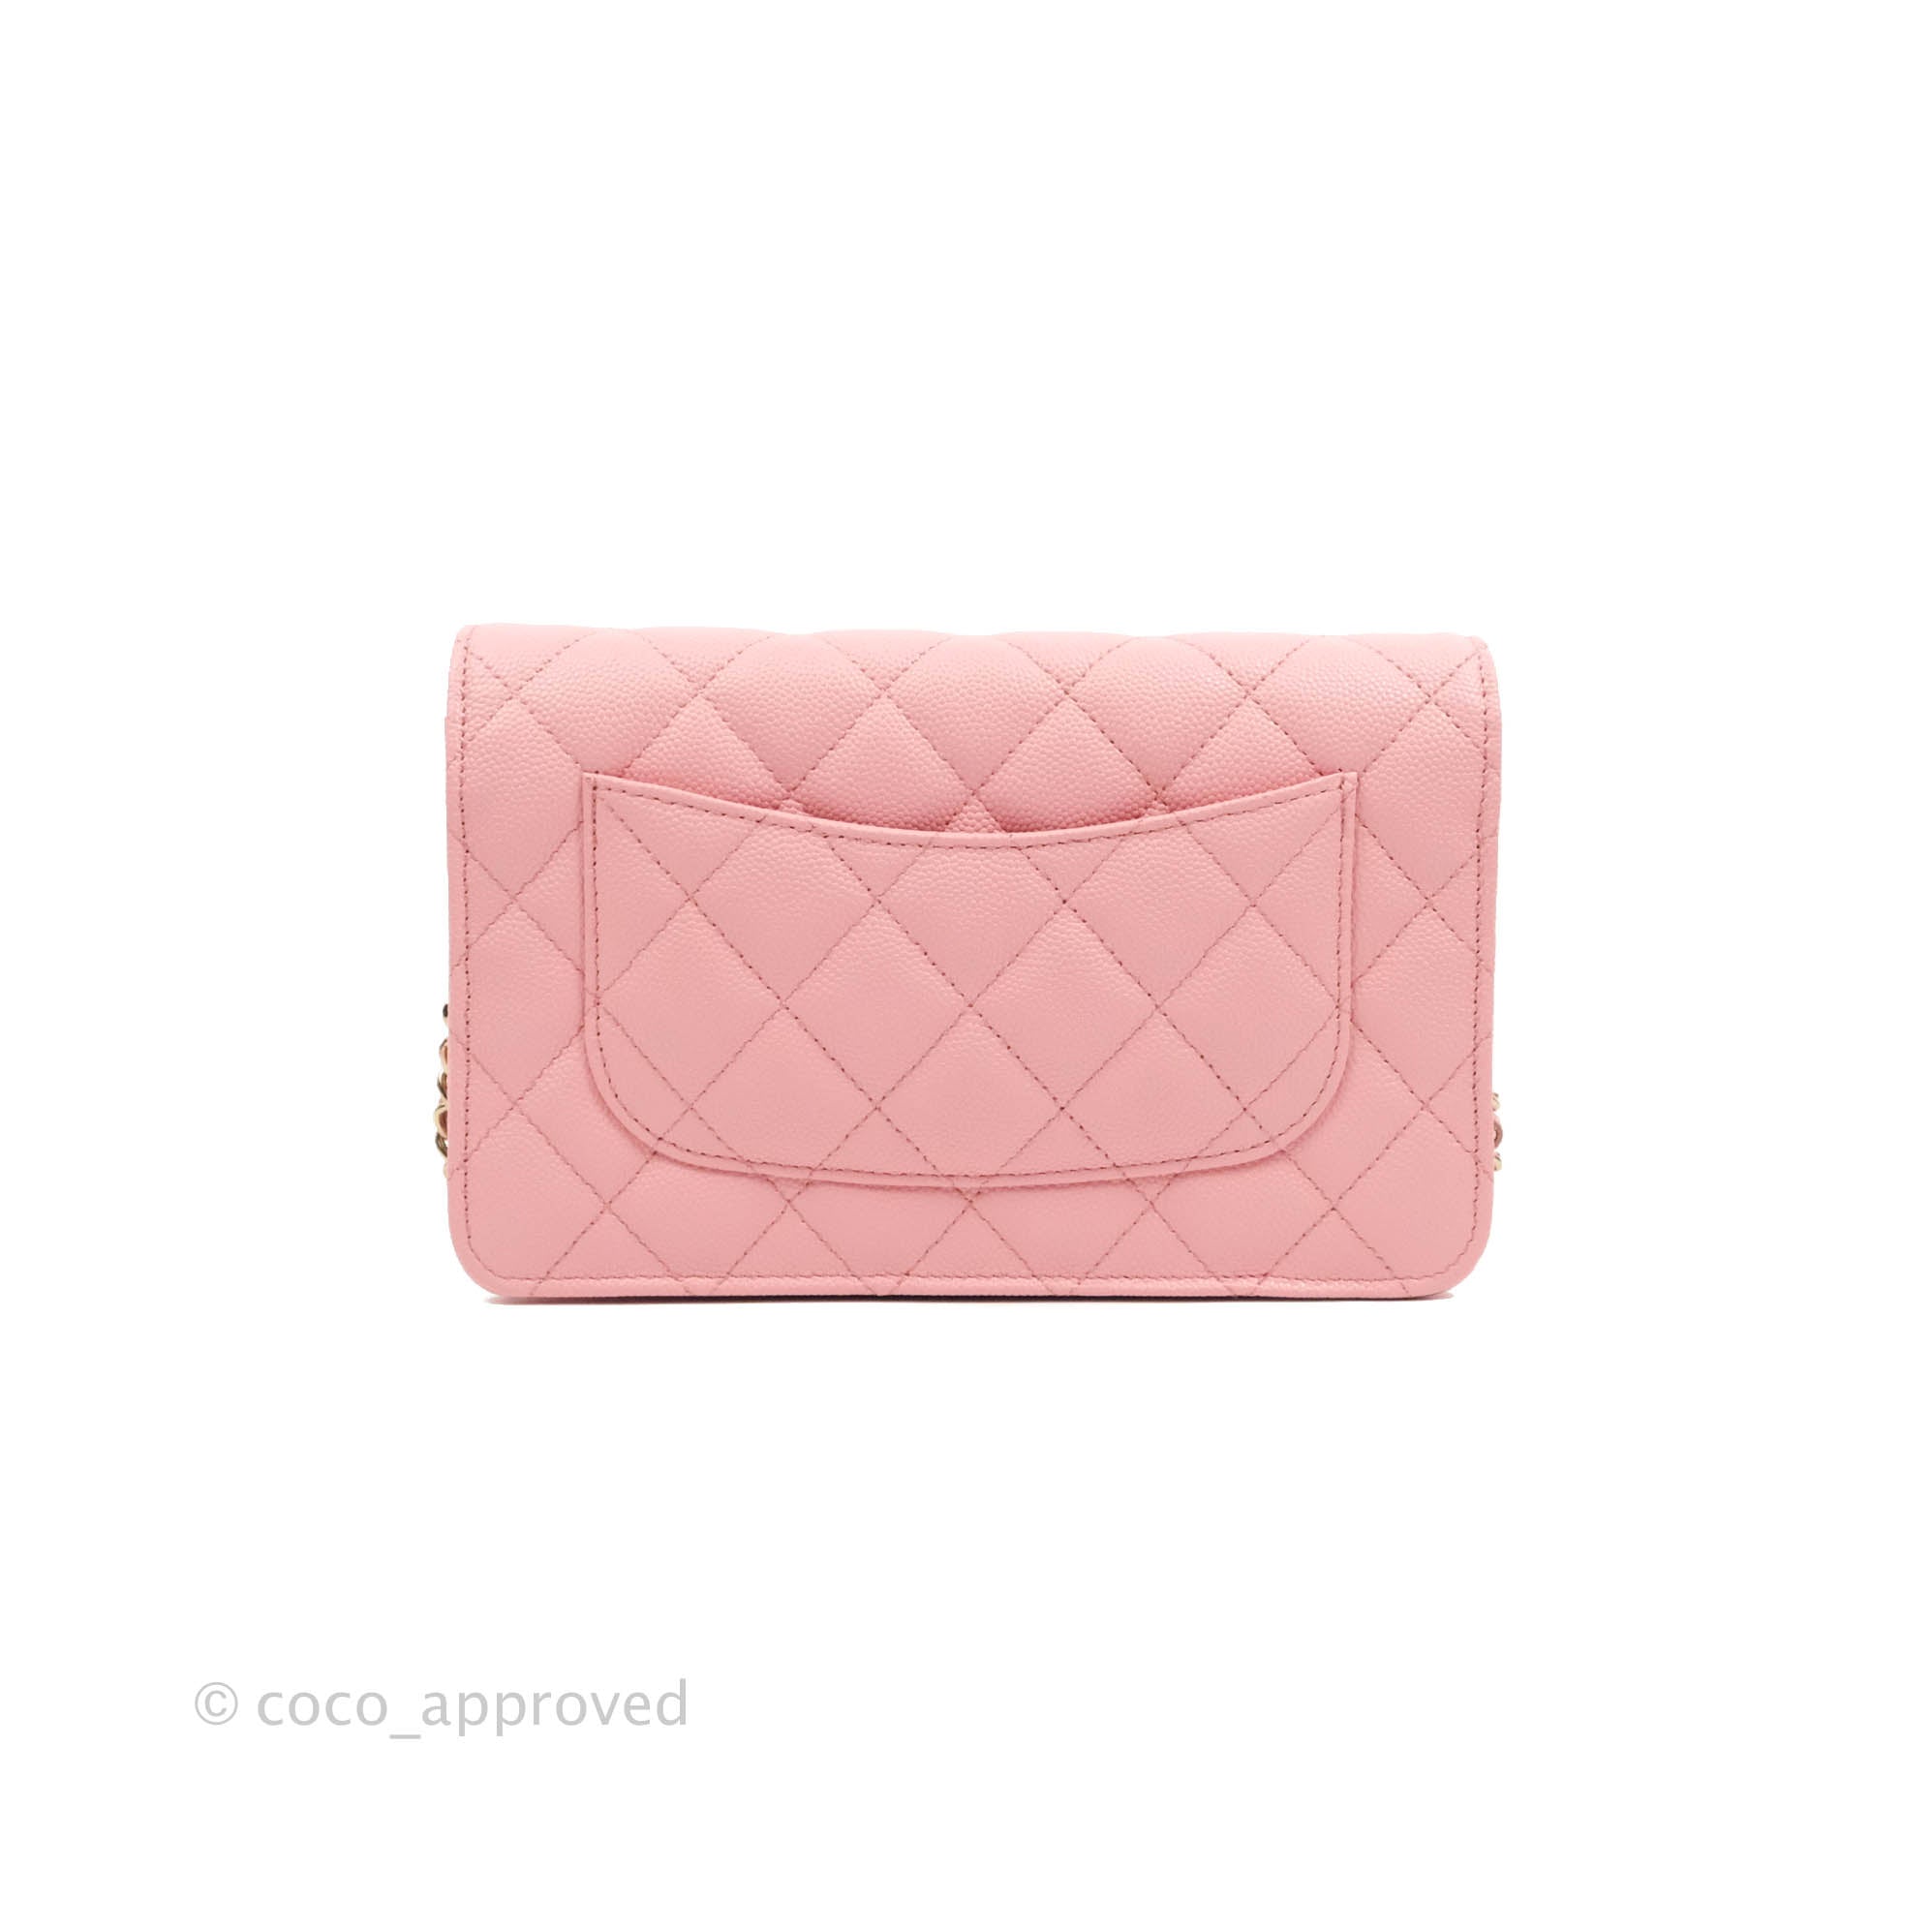 CHANEL 22S CAVIAR QUILTED CLASSIC FLAP GHW MEDIUM WALLET - Light Pink